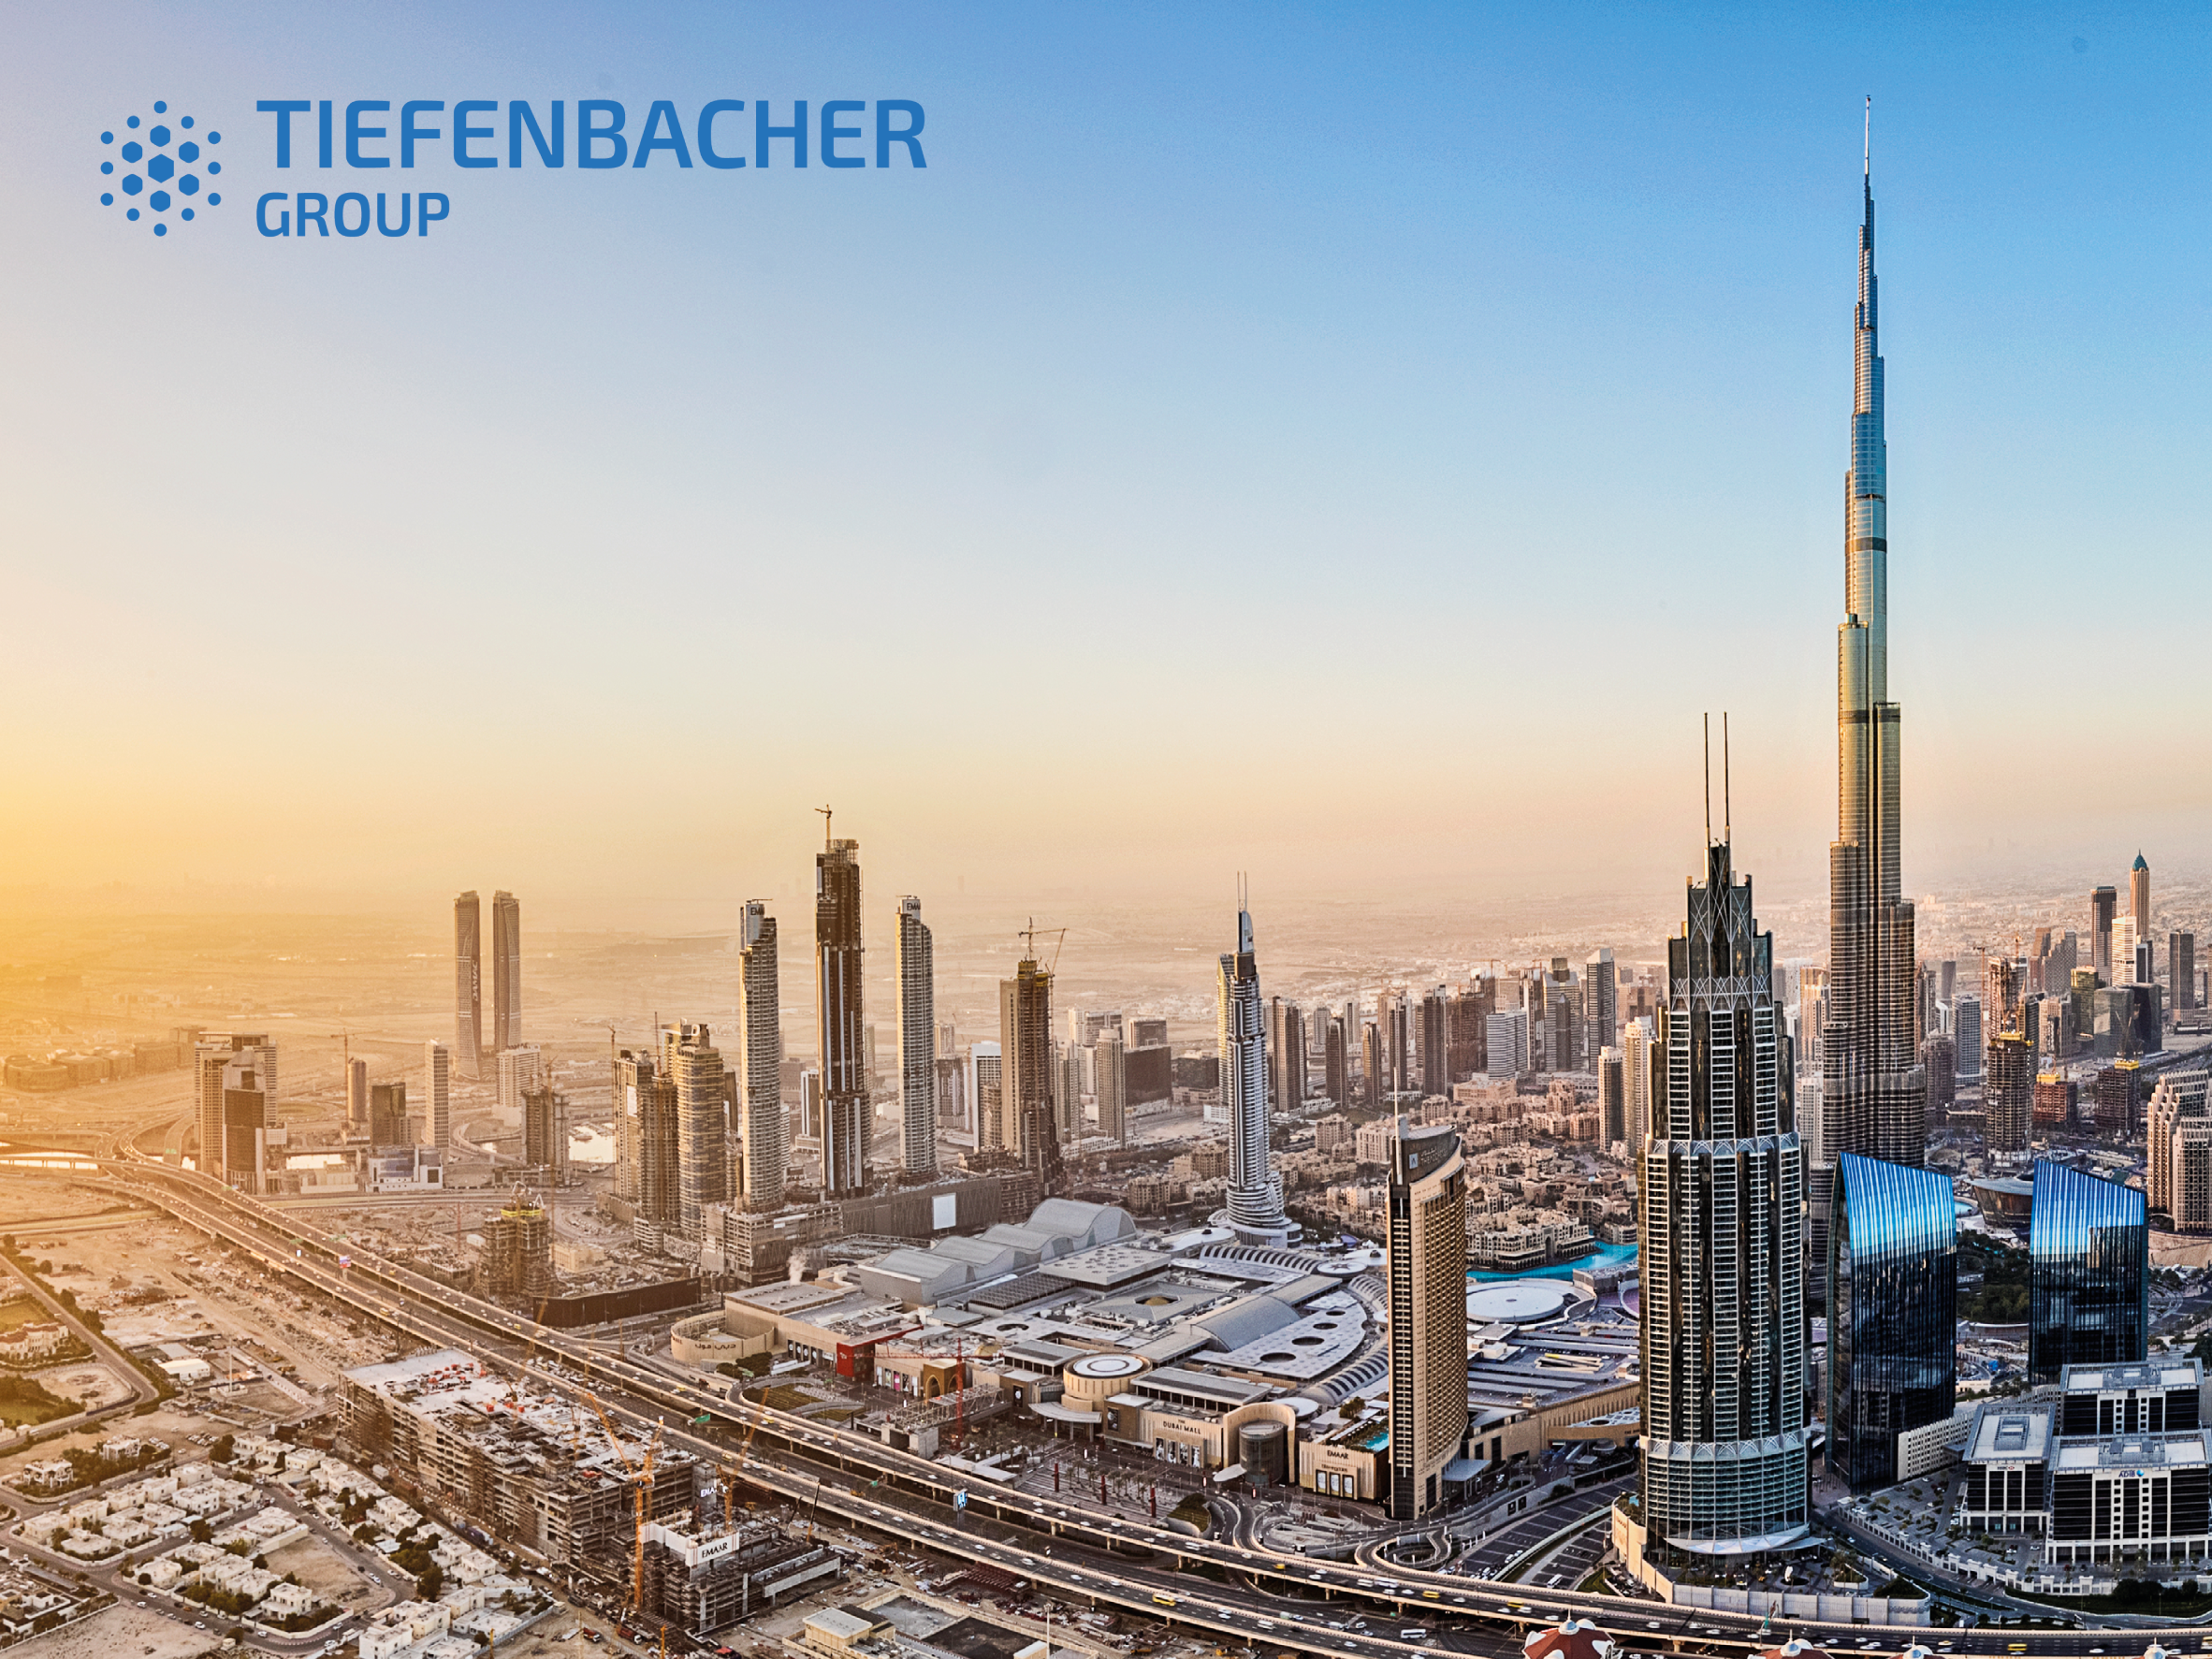 Tiefenbacher registered by United Arab Emirates Ministry of Health